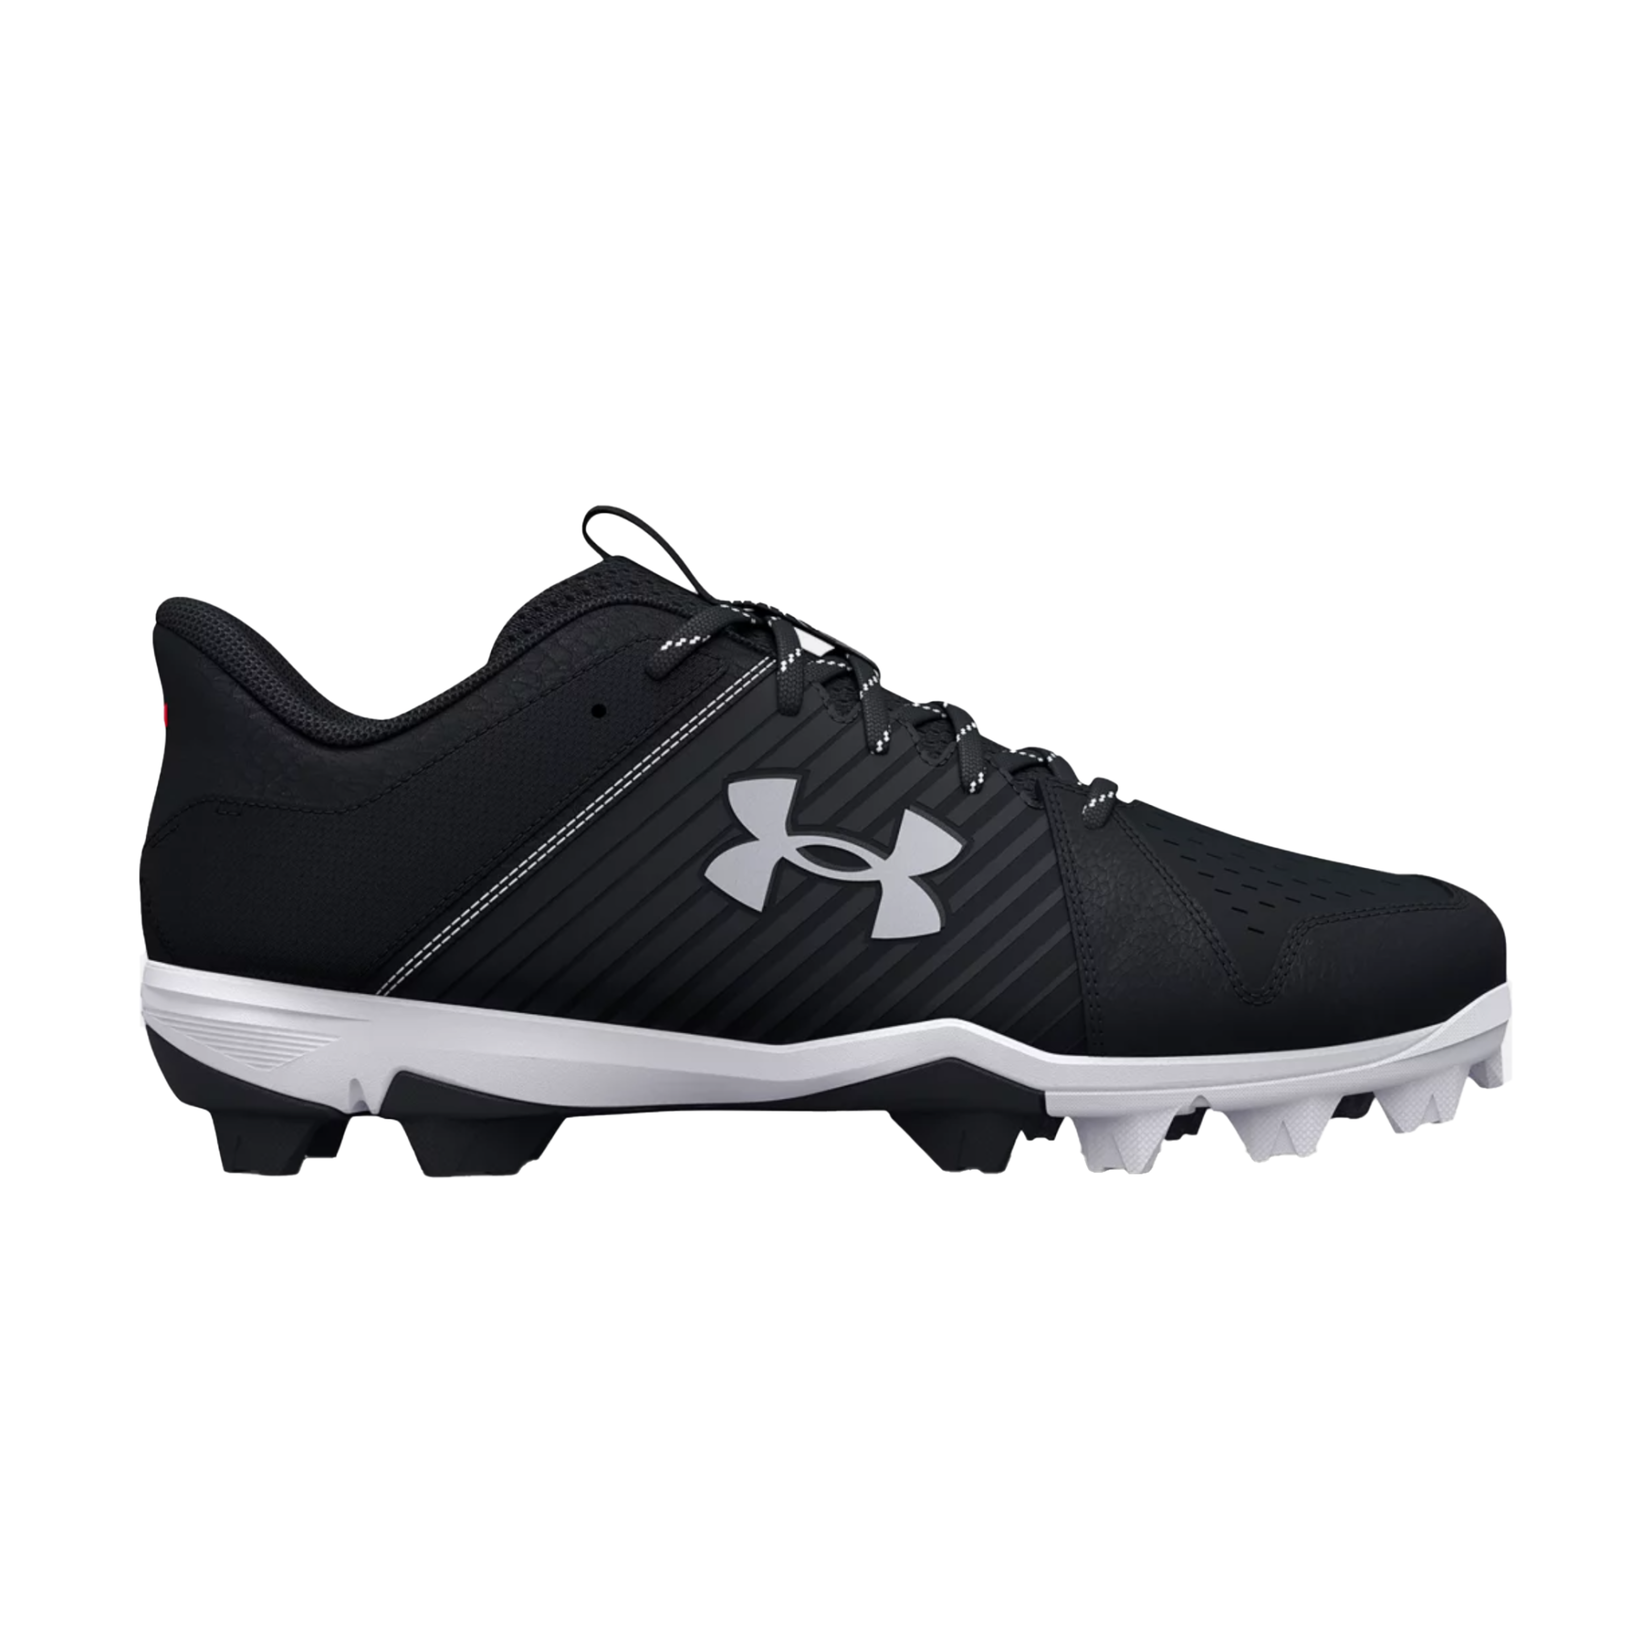 Under Armour Under Armour Leadoff Low RM Baseball Cleats